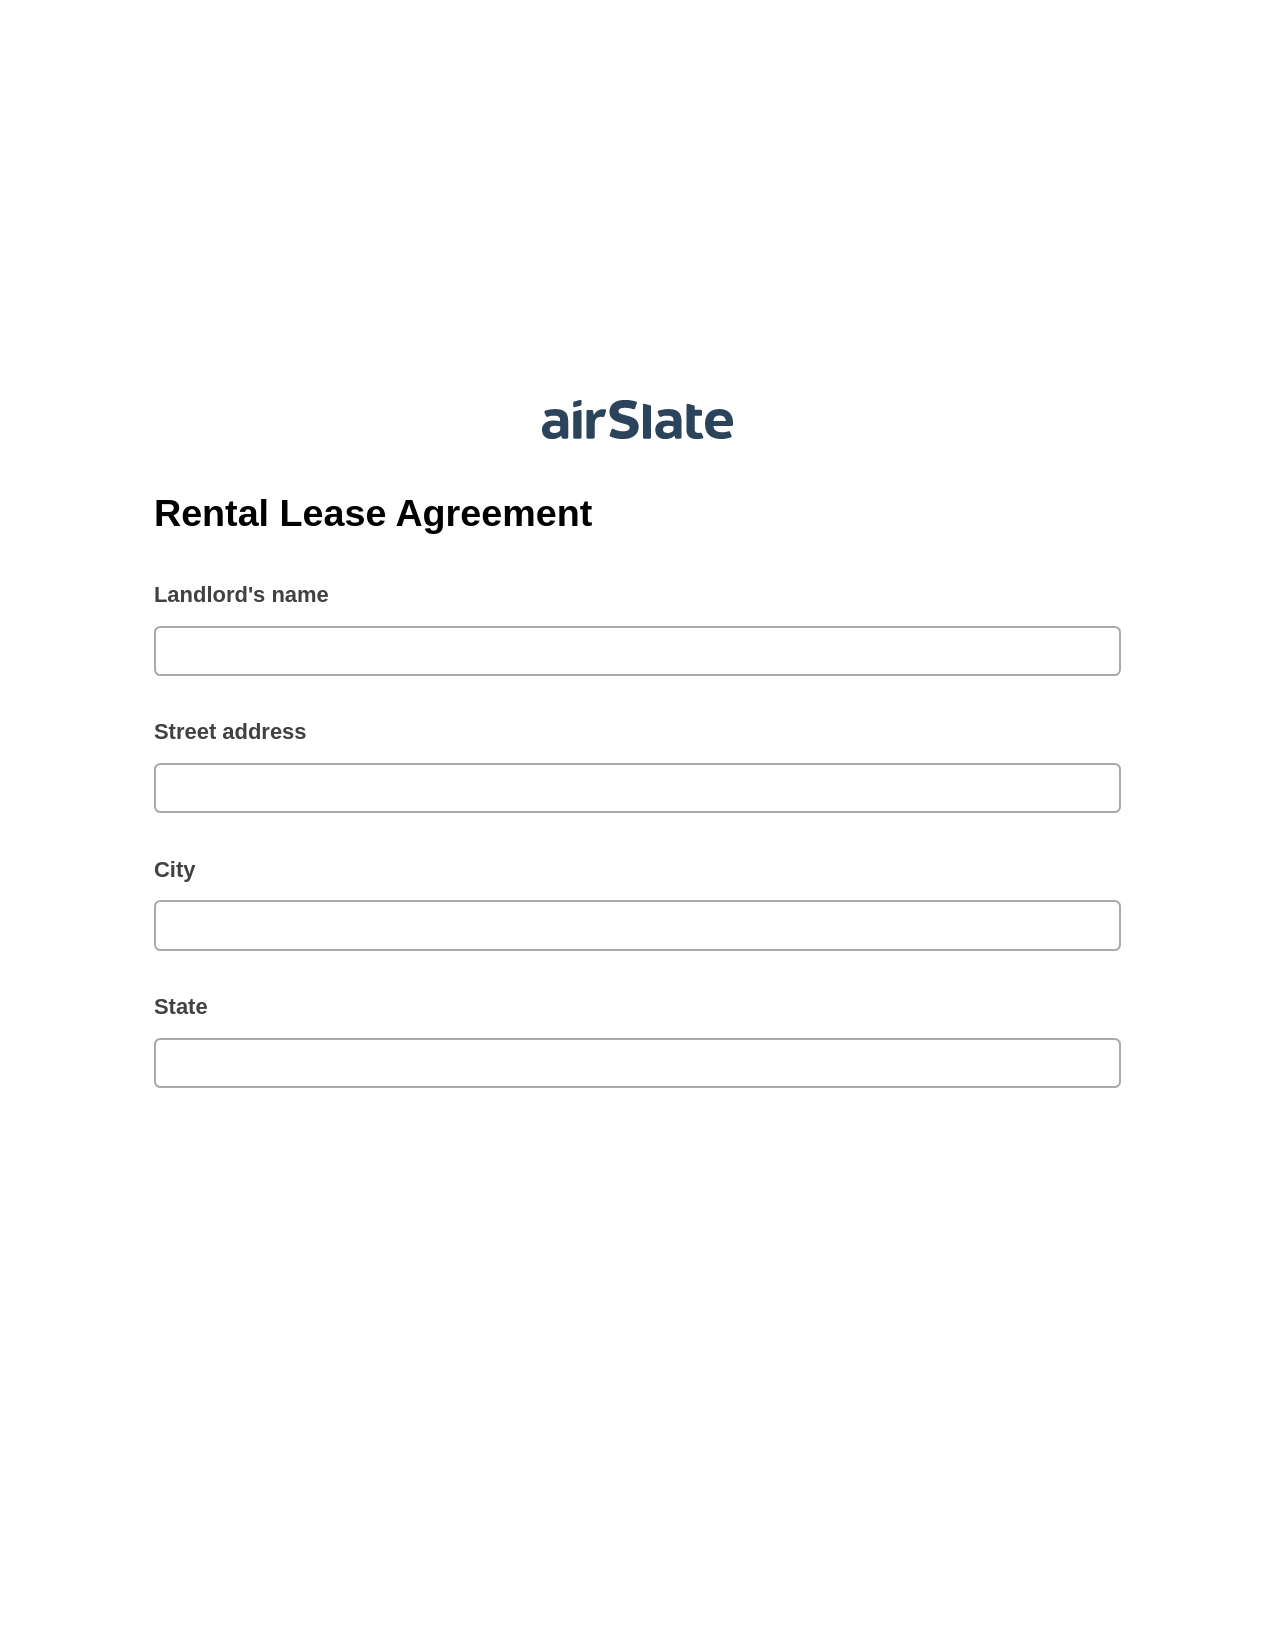 Multirole Rental Lease Agreement Pre-fill from MySQL Dropdown Options Bot, Create slate from another Flow Bot, Google Drive Bot